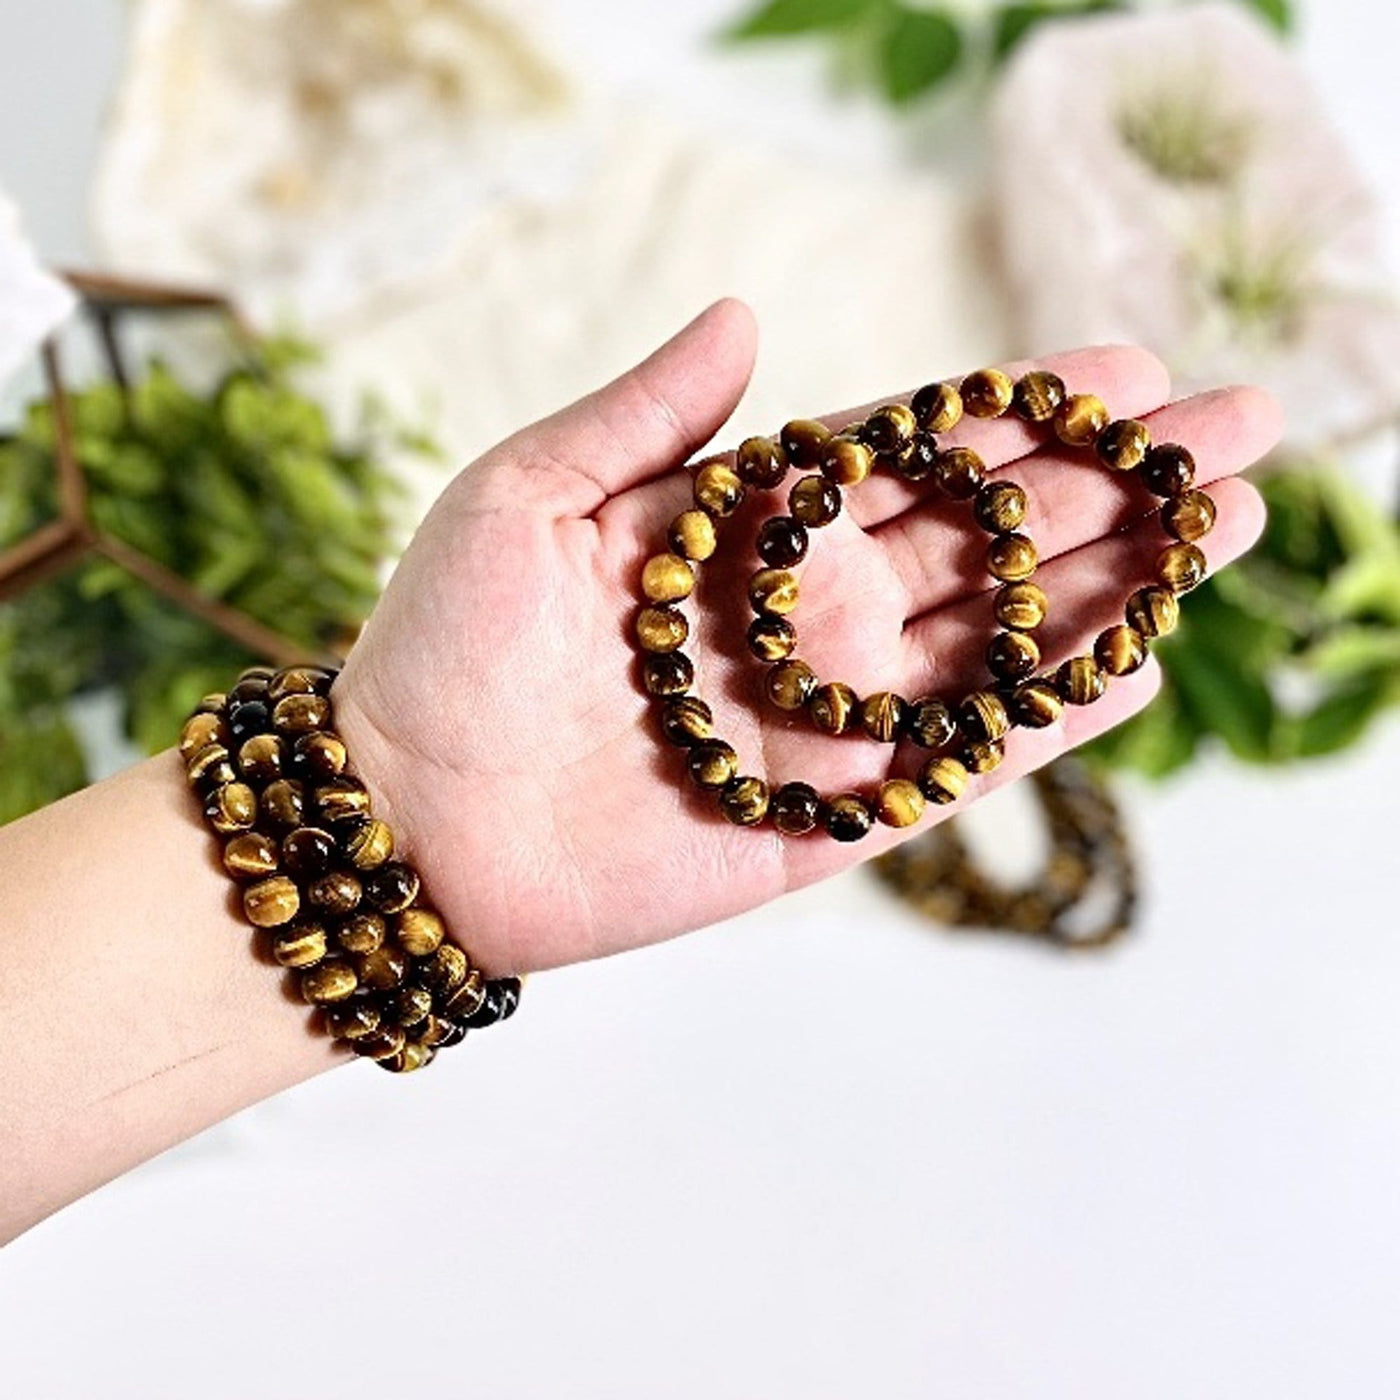 Tigers Eye Round Bead Bracelets 8mm. Tiger Eye has lovely bands of yellow-golden color through silky lusters of brown to red color. Tigers Eye is known as the “POWER STONE”.  This is a powerful stone that aids harmony and balance, helping to release anxiety and fear.